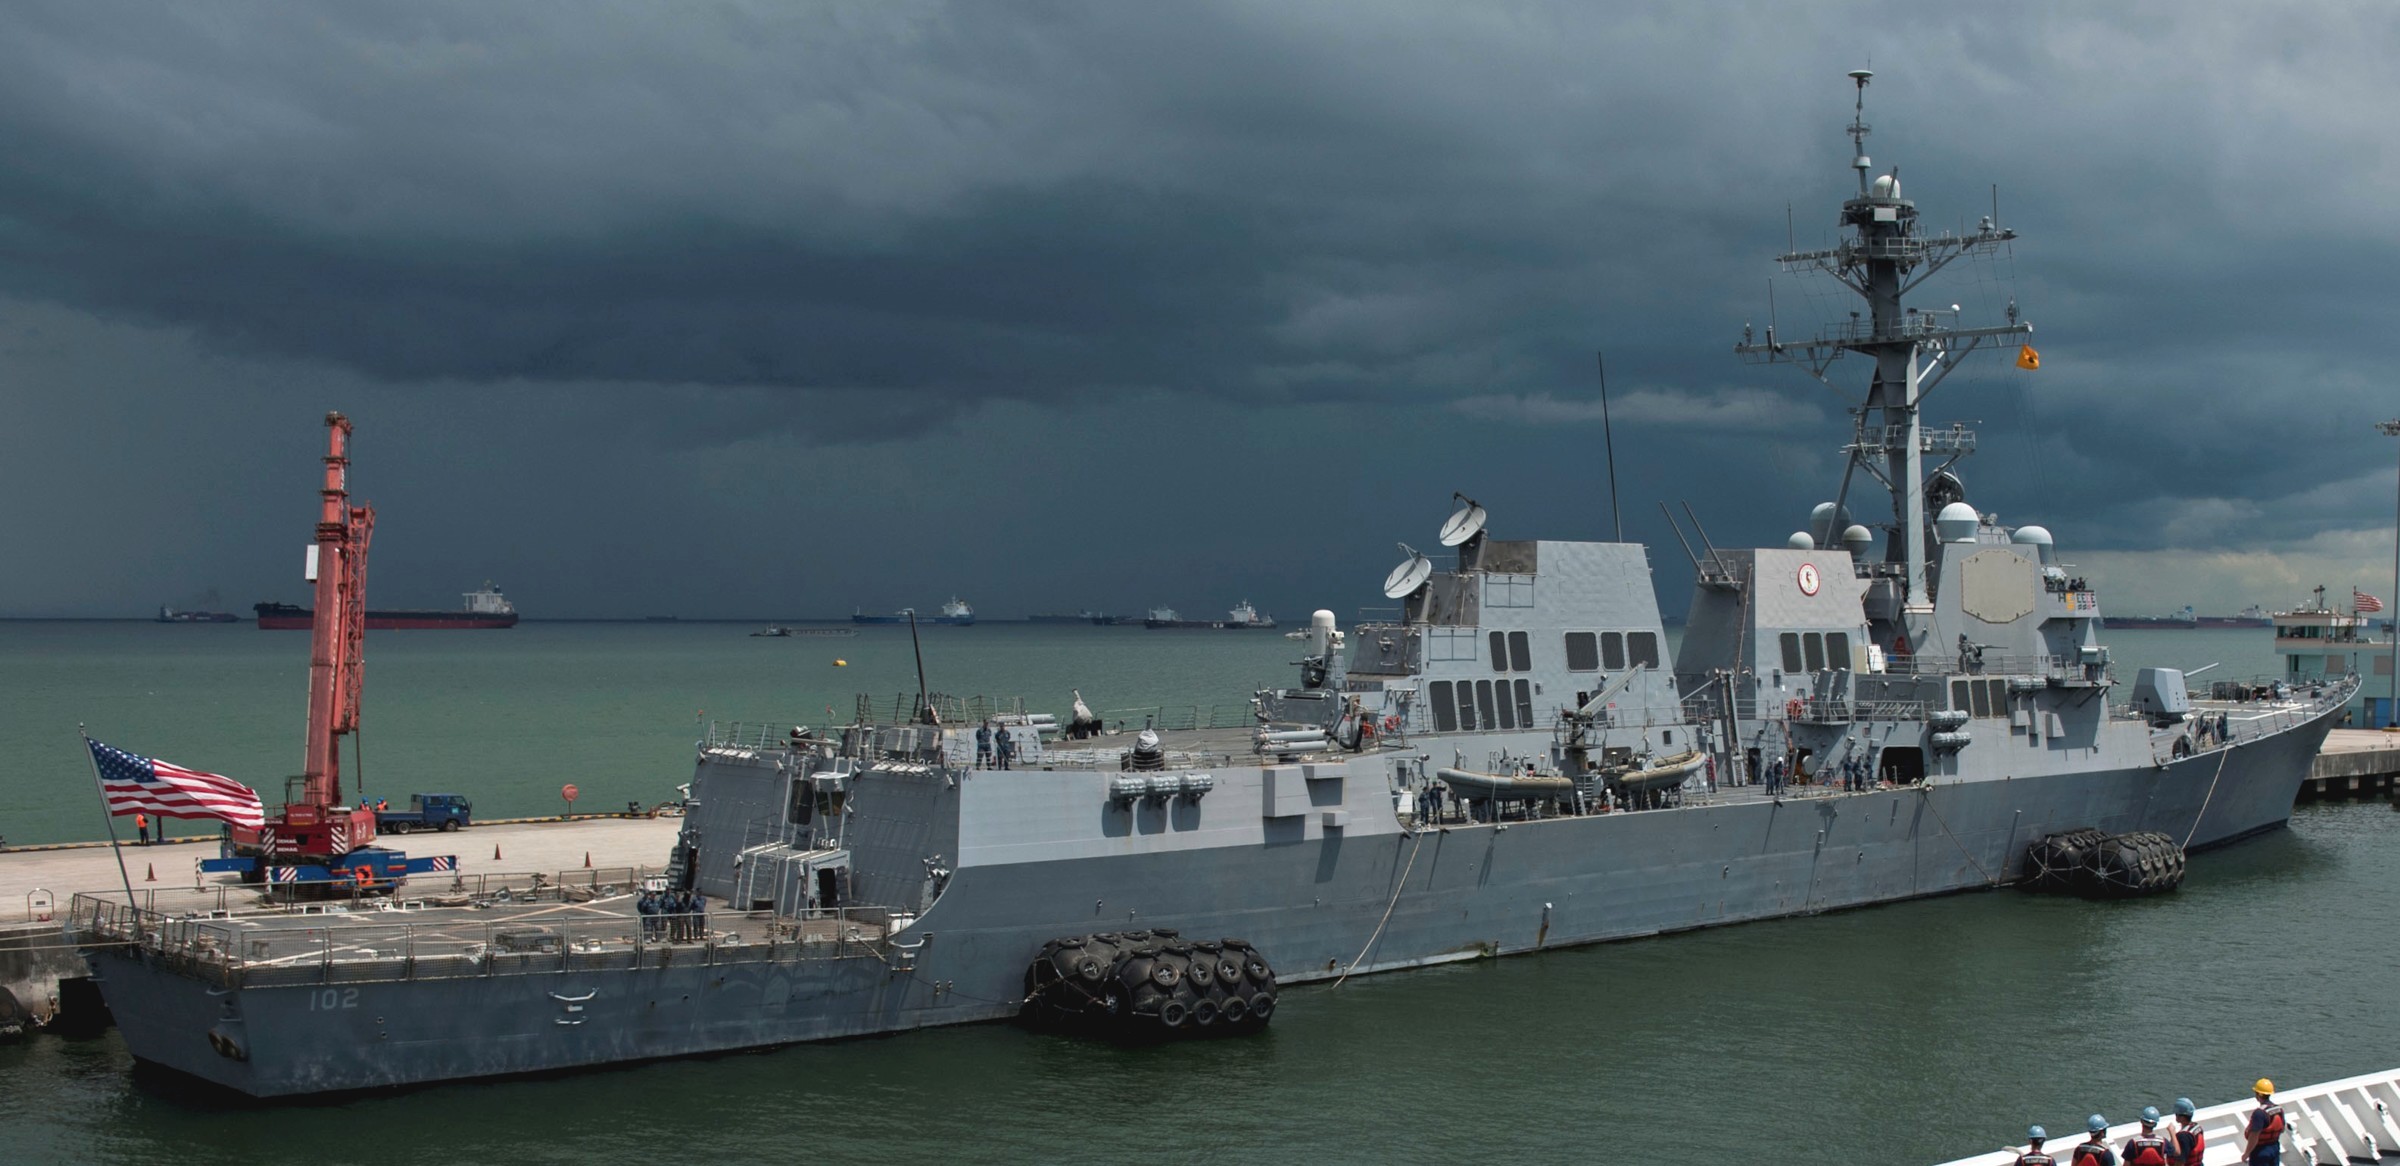 ddg-102 uss sampson guided missile destroyer 2012 21 changi naval base singapore